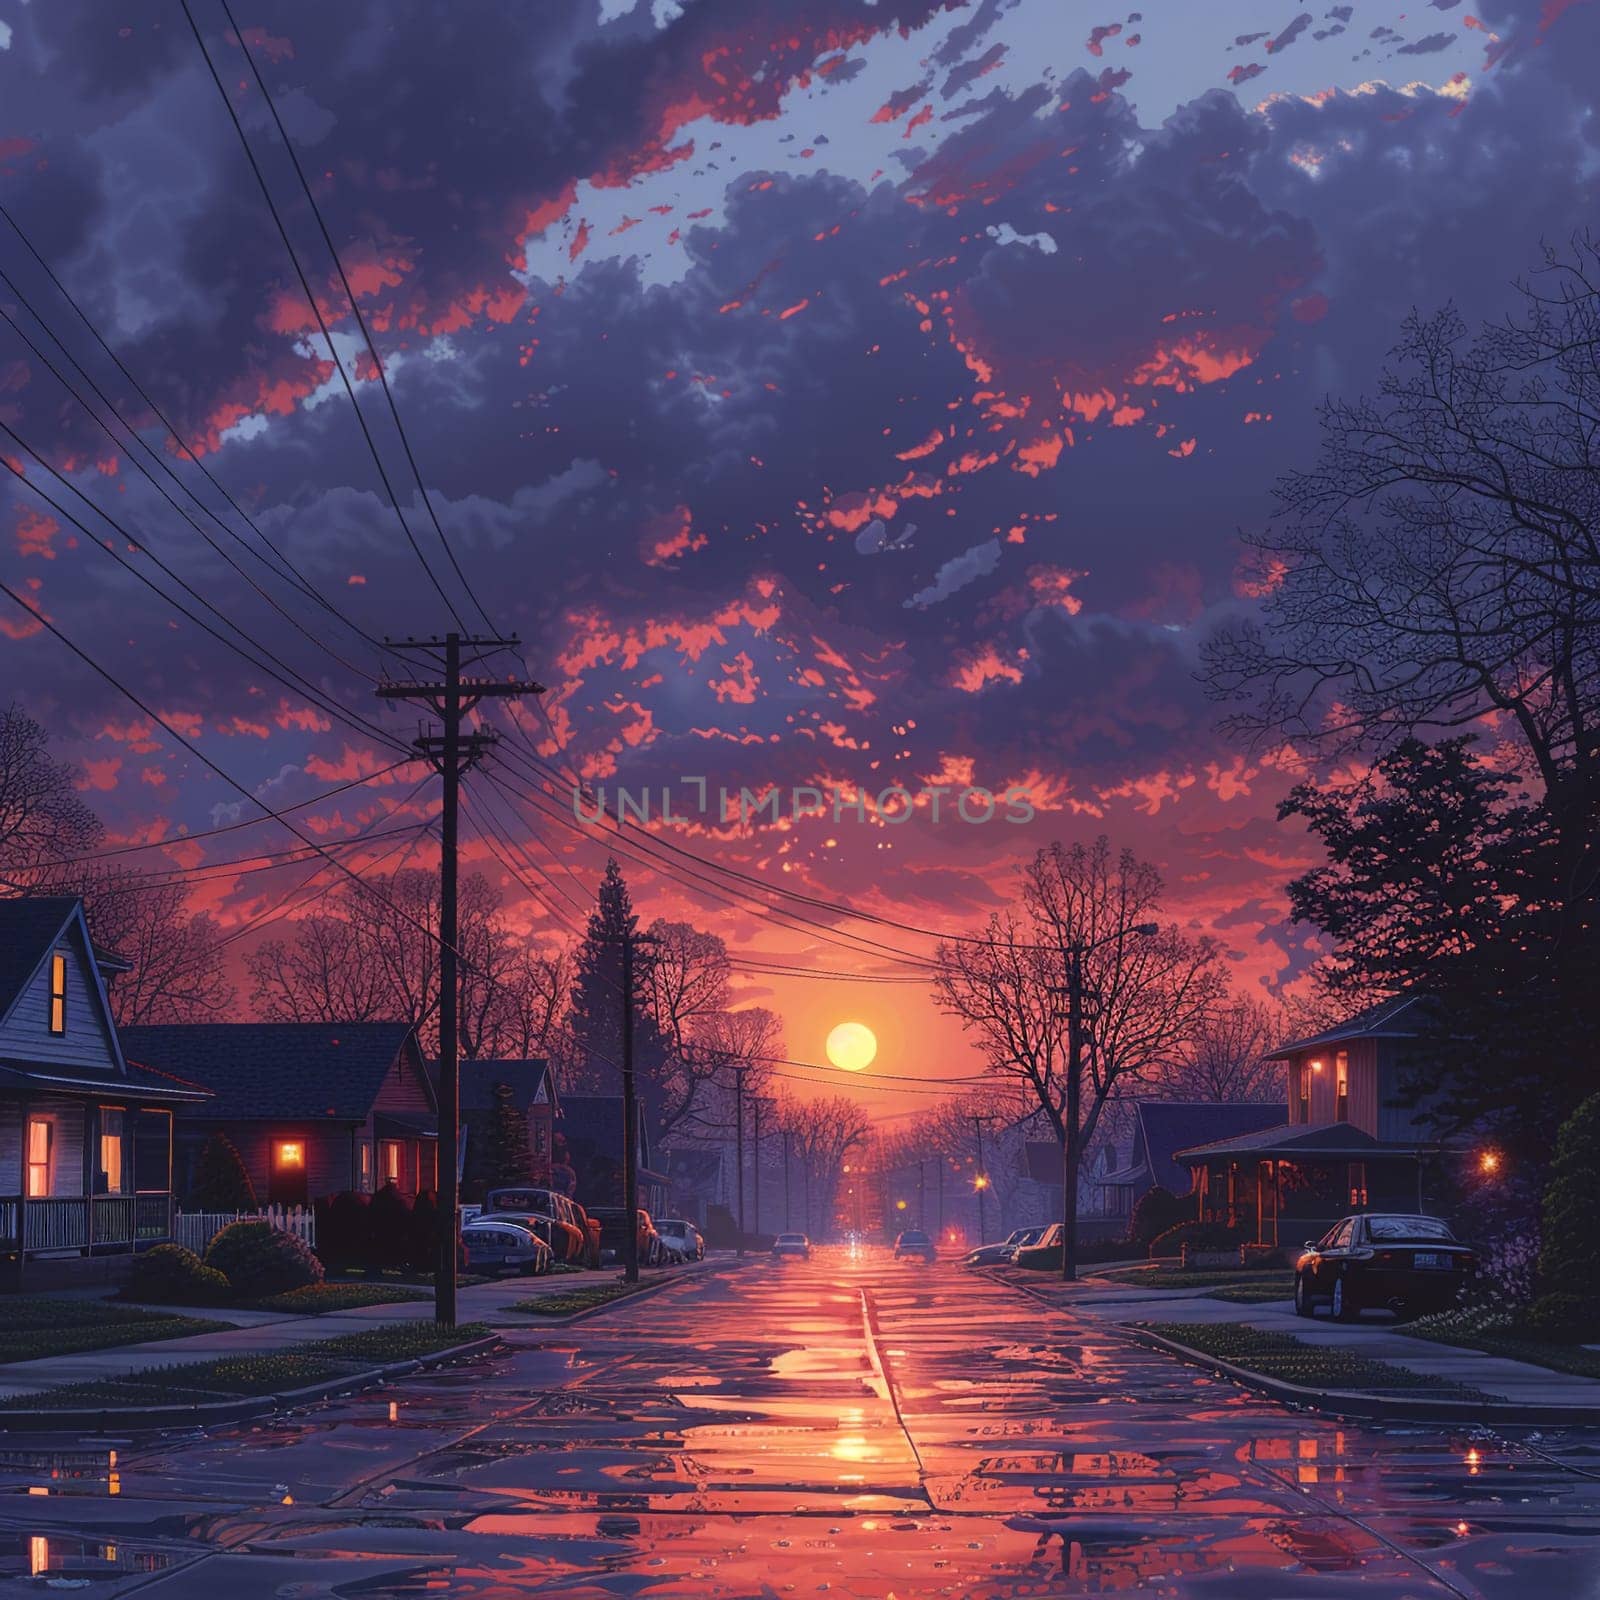 Picturesque depiction of quiet neighborhood street at dawn by Benzoix